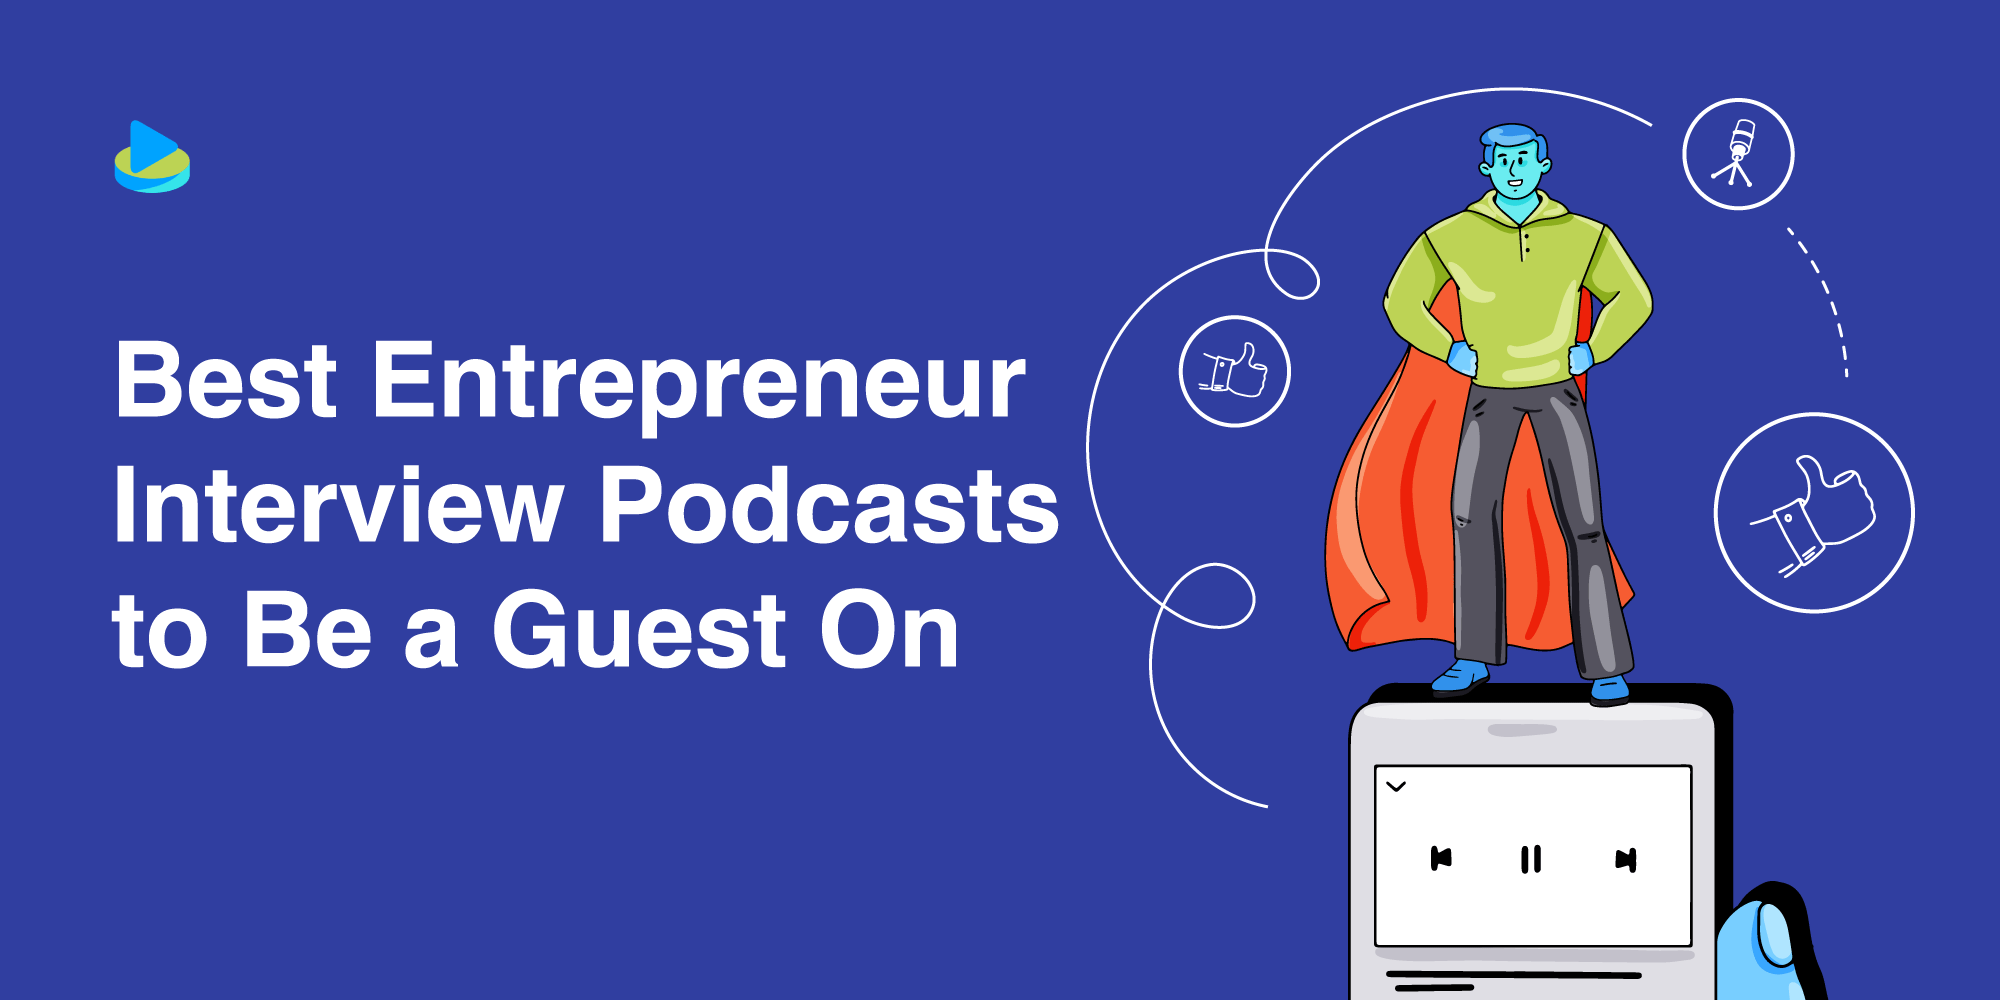 20 Best Entrepreneur Interview Podcasts to Be a Guest On